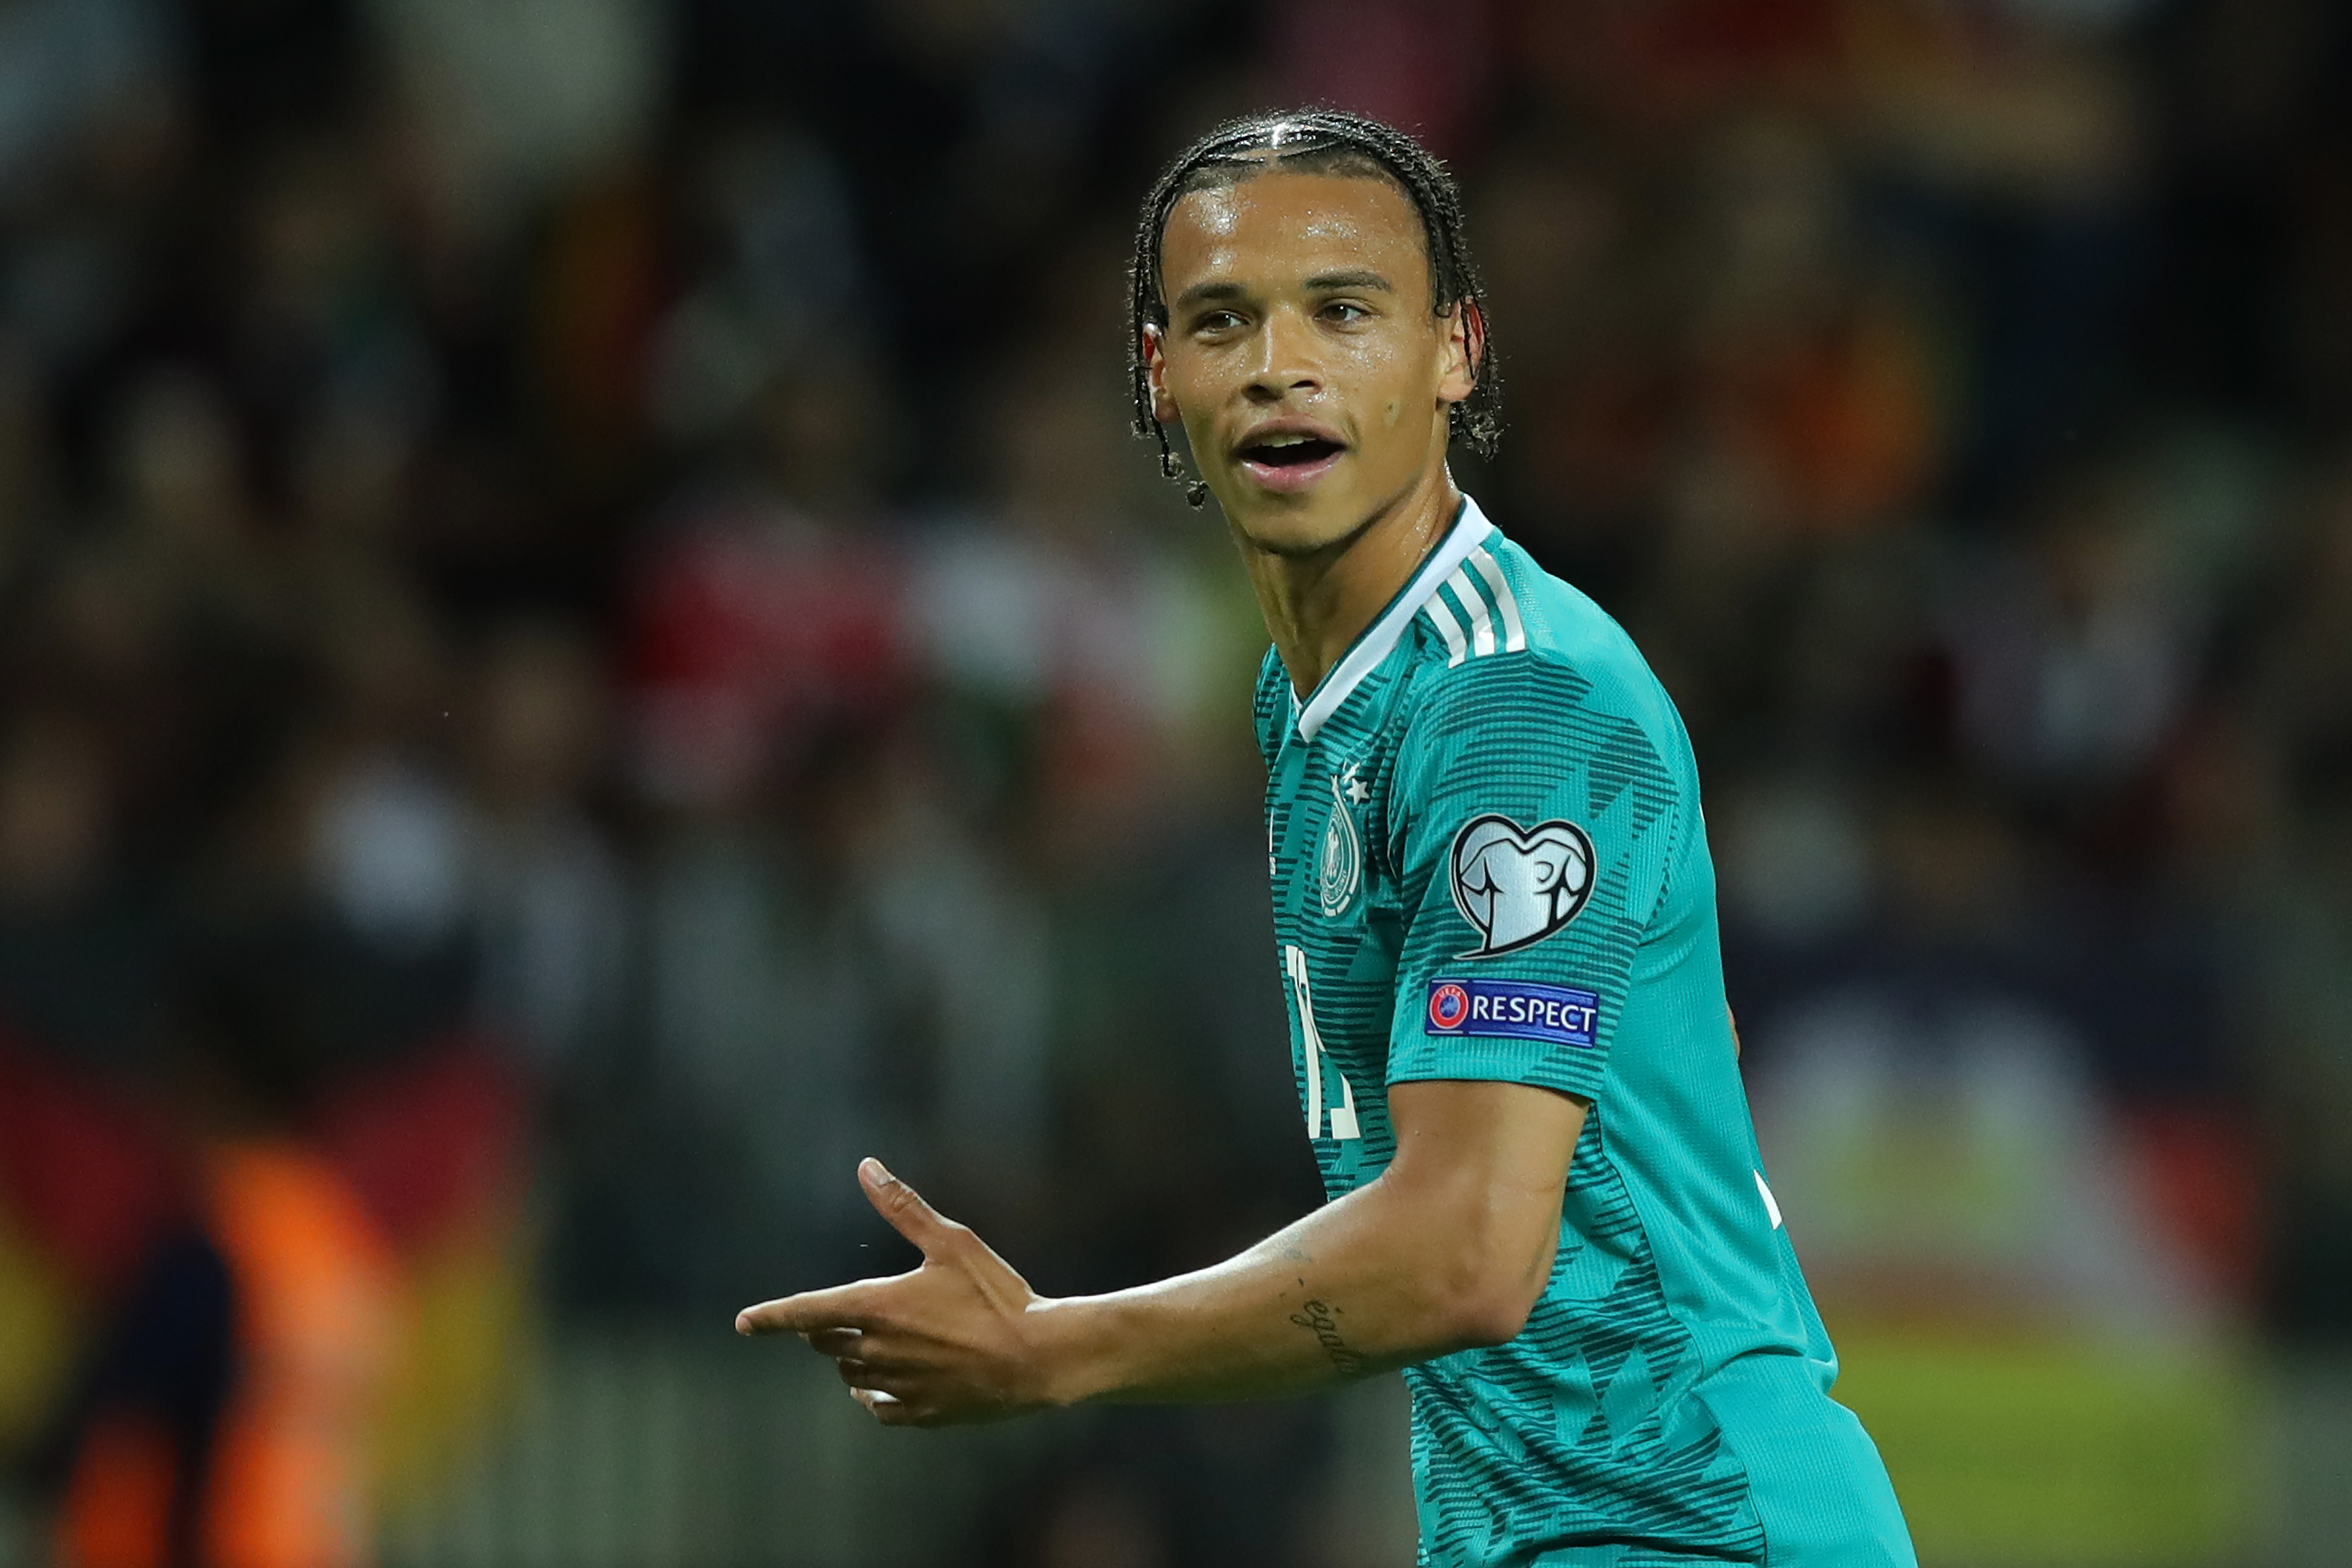 Leroy Sane has enjoyed a fine turnaround in fortunes. (Photo by Alexander Hassenstein/Bongarts/Getty Images)